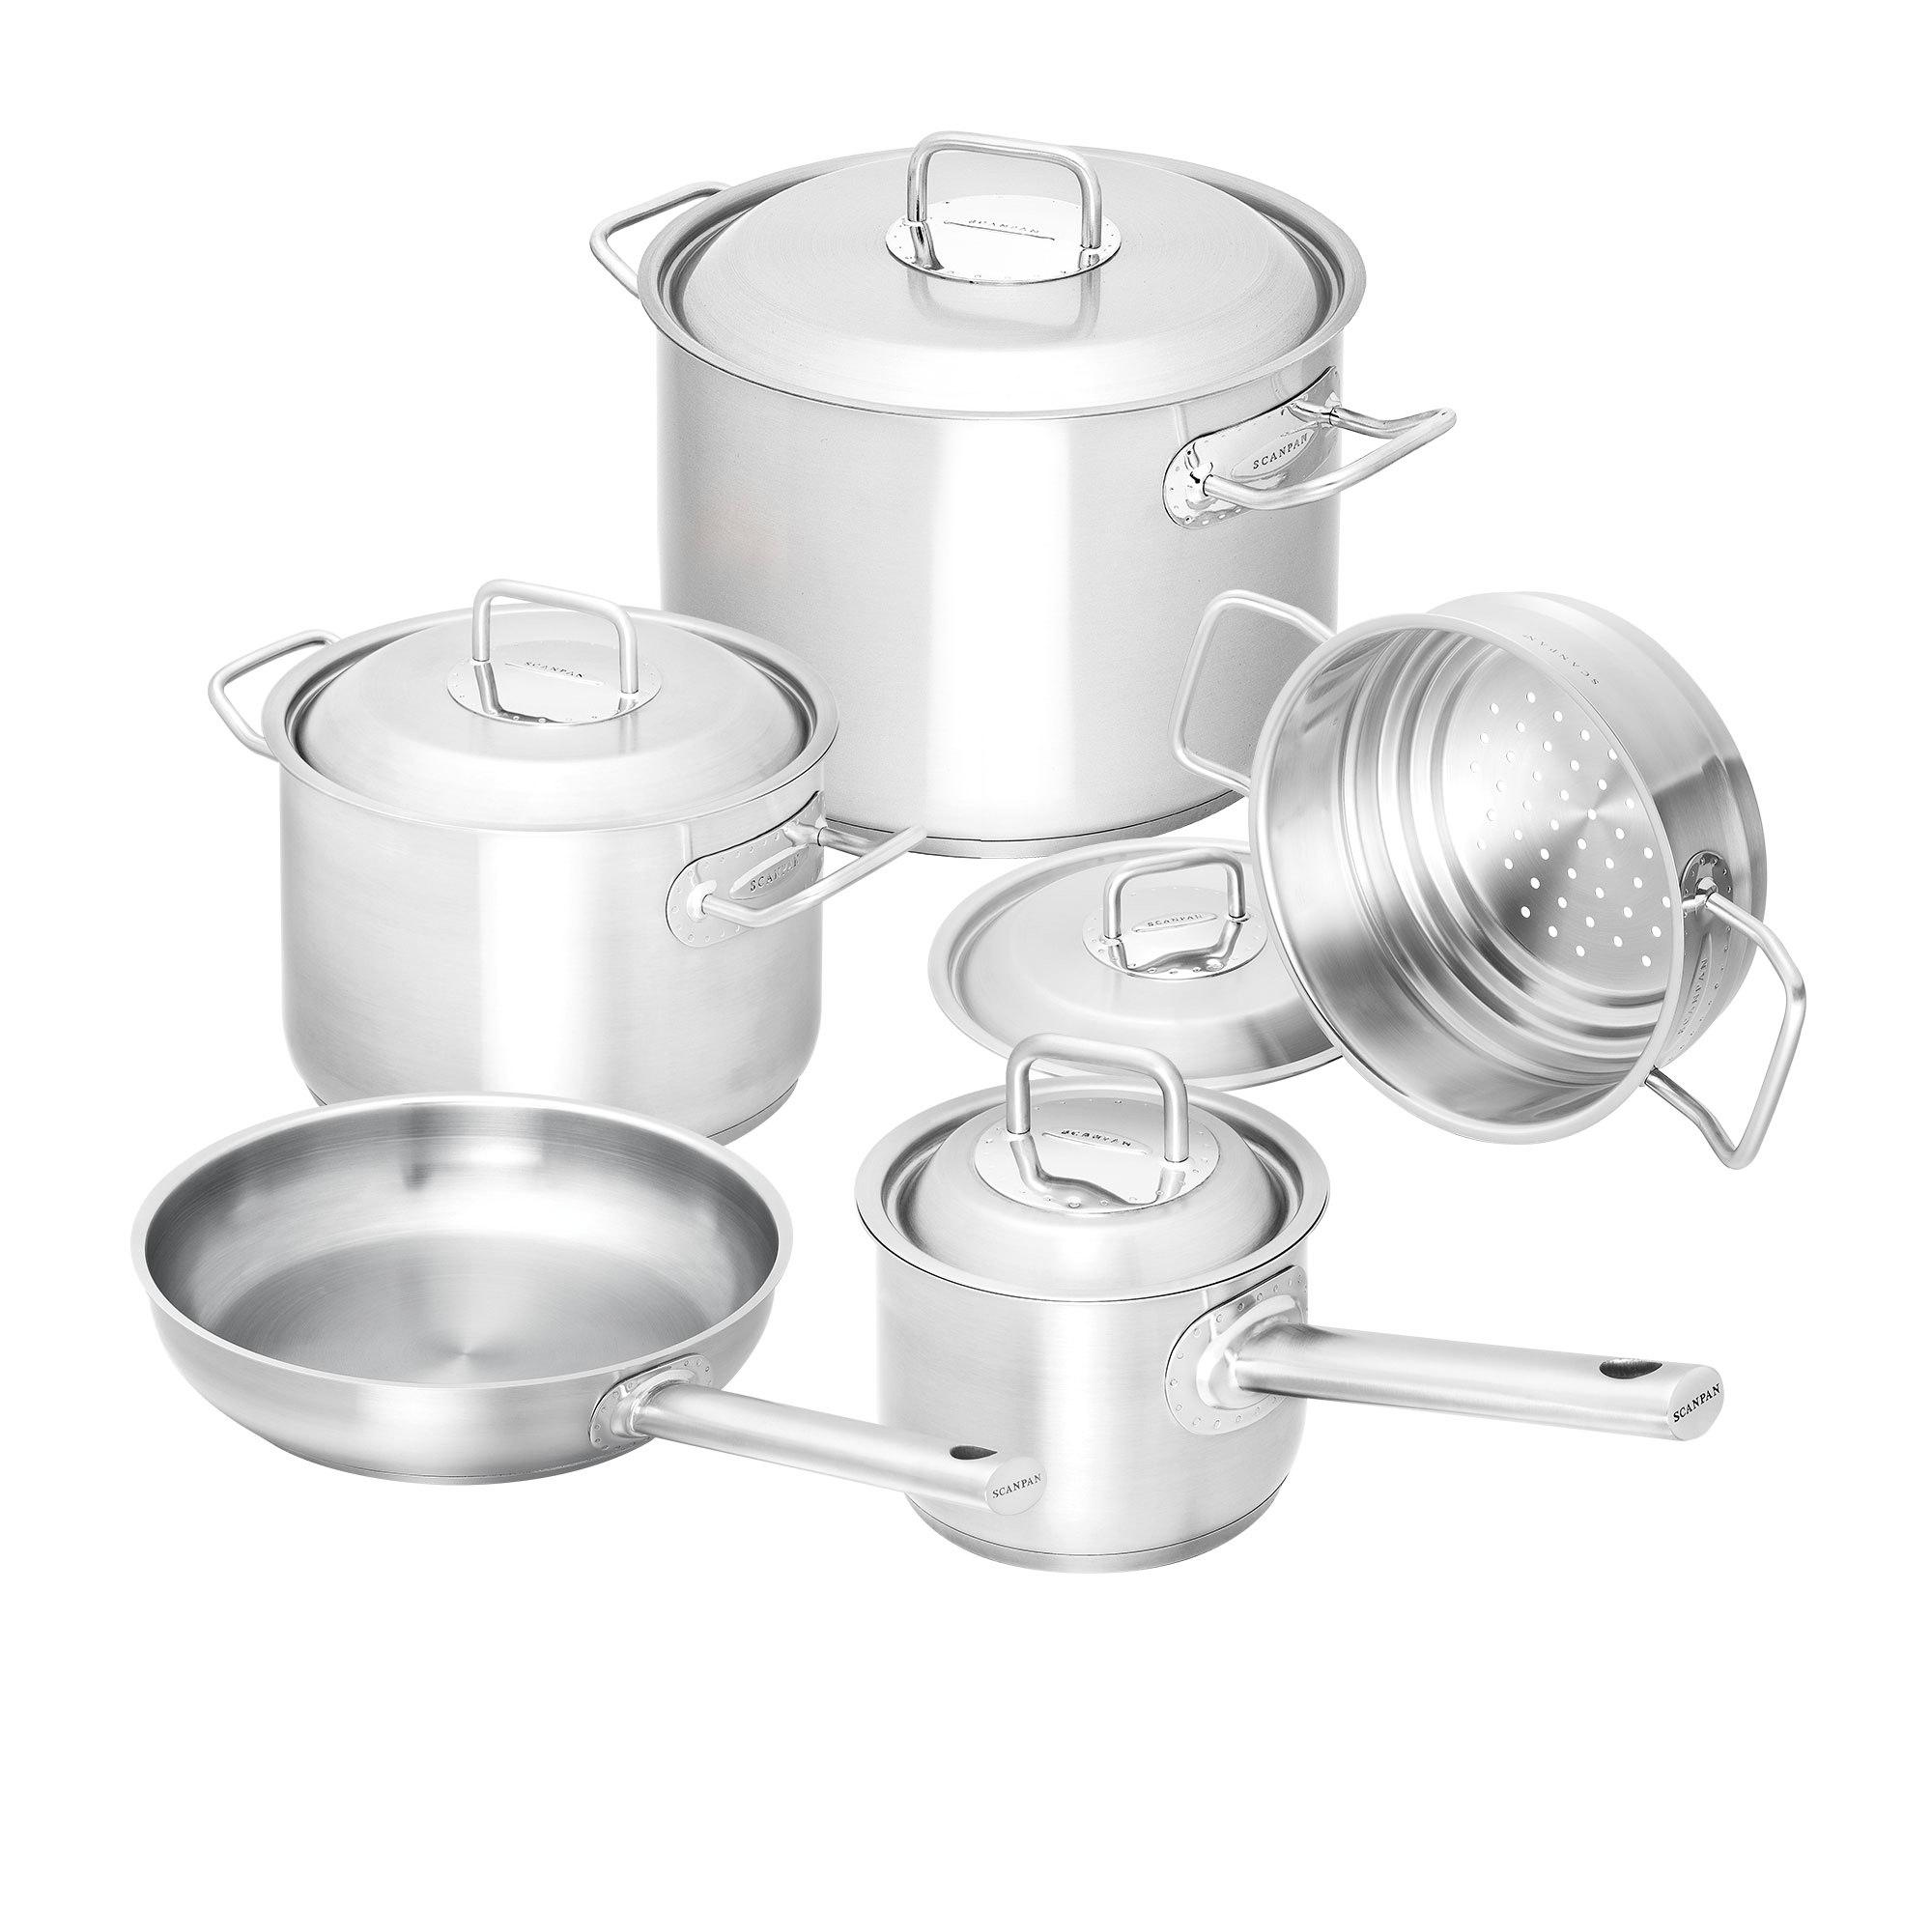 Scanpan Commercial 5pc Stainless Steel Cookware Set Image 1